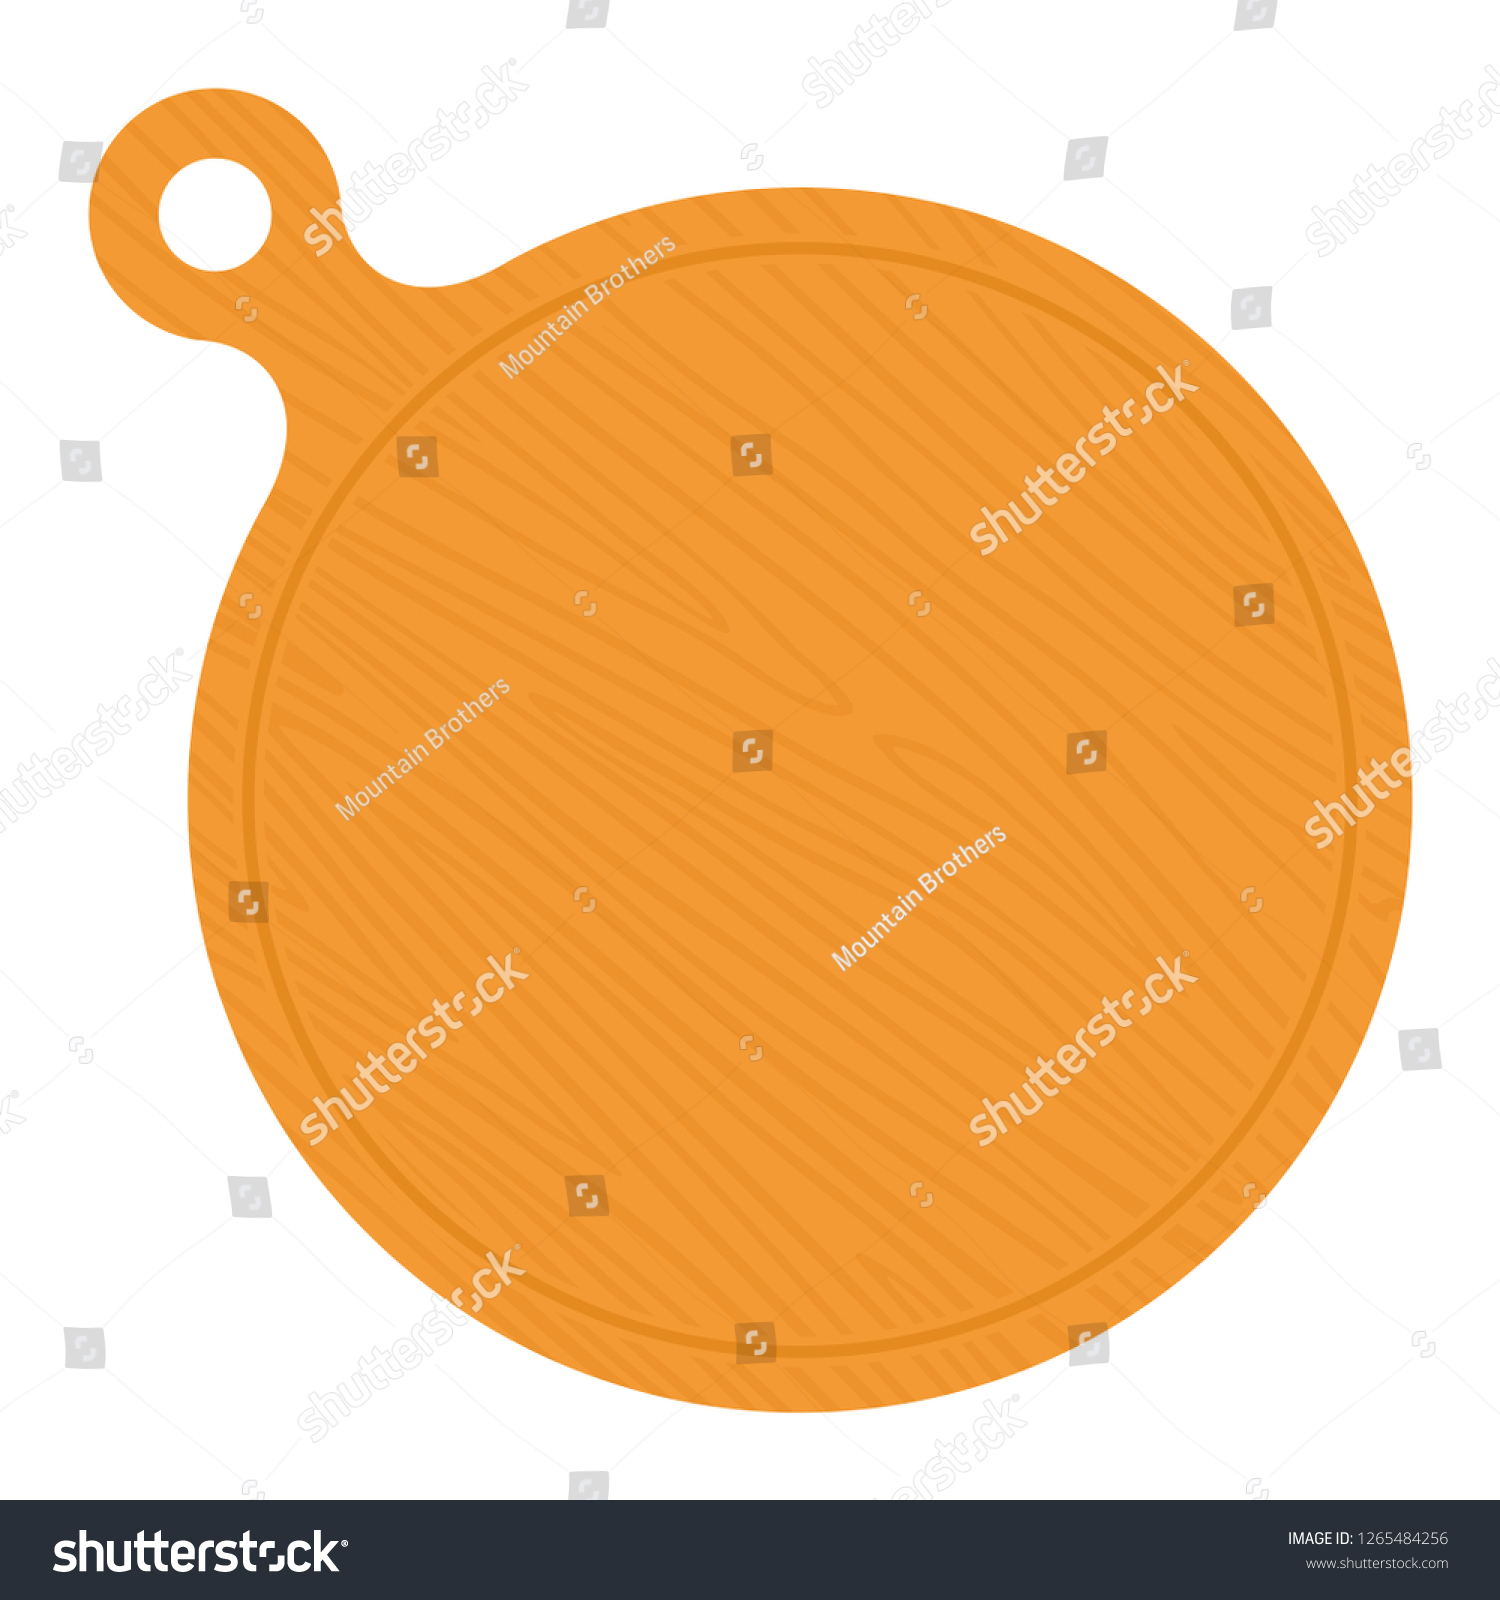 SVG of Round wooden pizza serving board flat single icon vector isolated on white svg